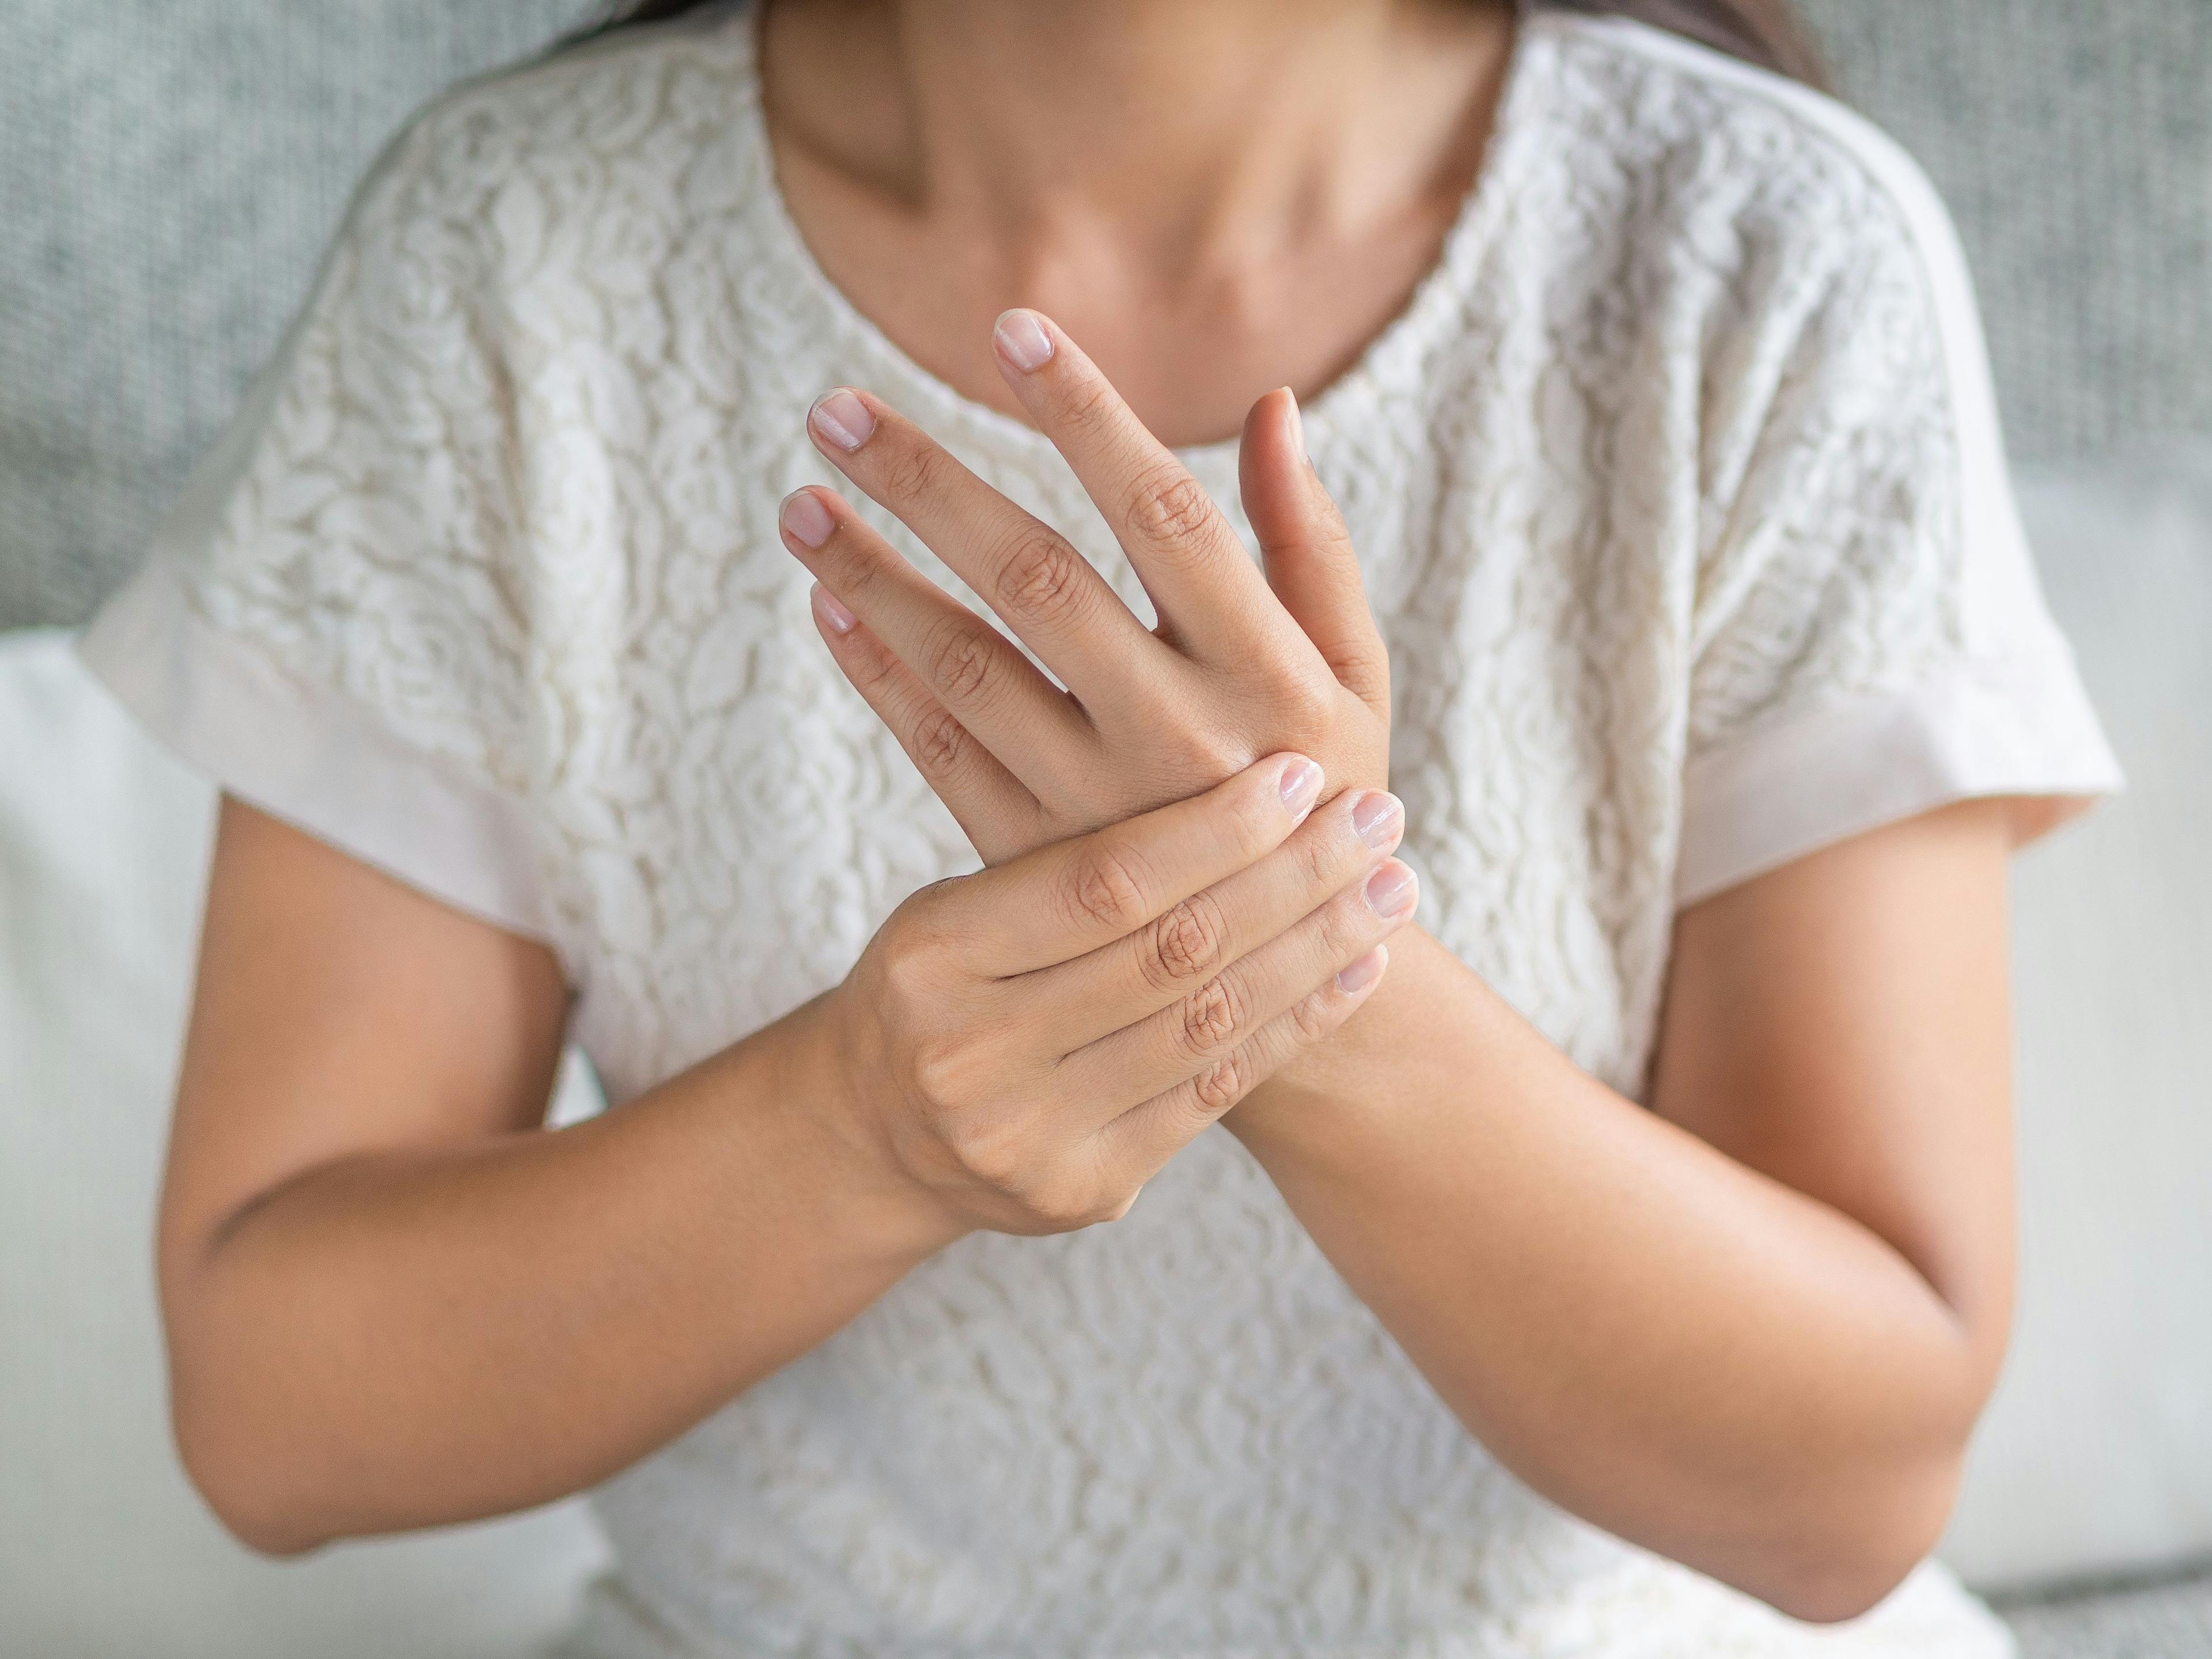 Woman experiencing statin-associated muscle symptoms in her hand